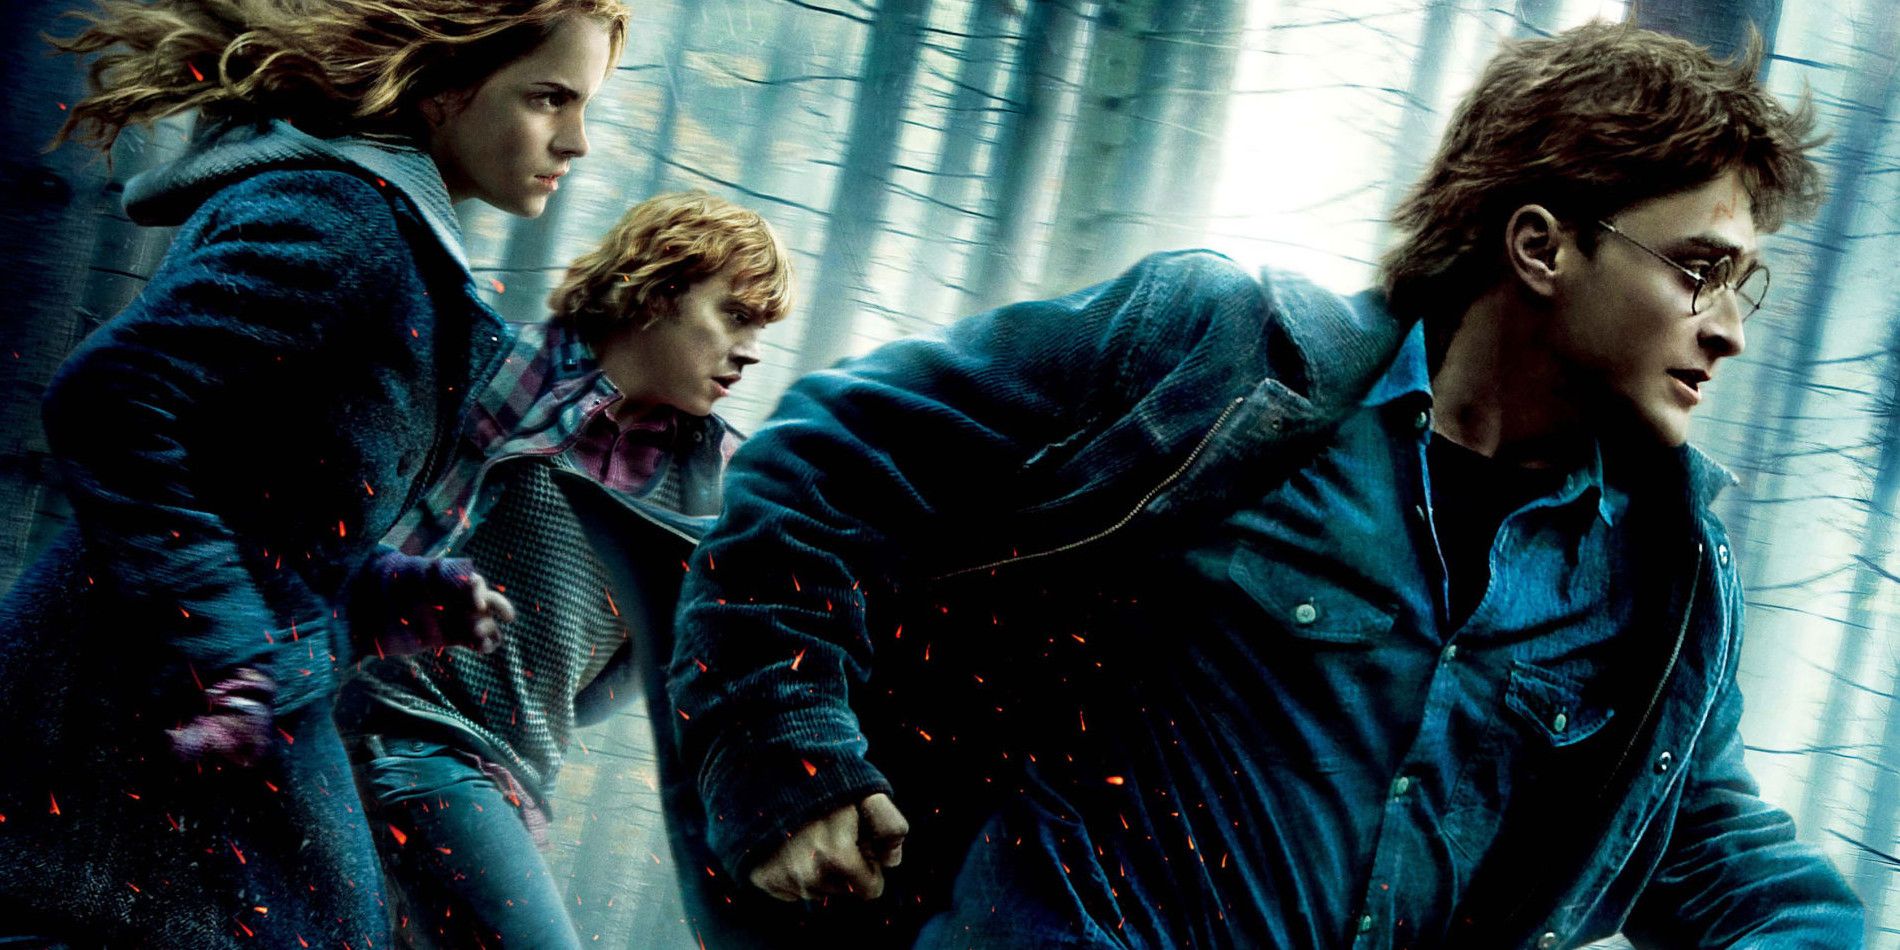 Harry Potter and the Deathly Hallows Part 1 Poster of Harry Ron and Hermione running through a forest.